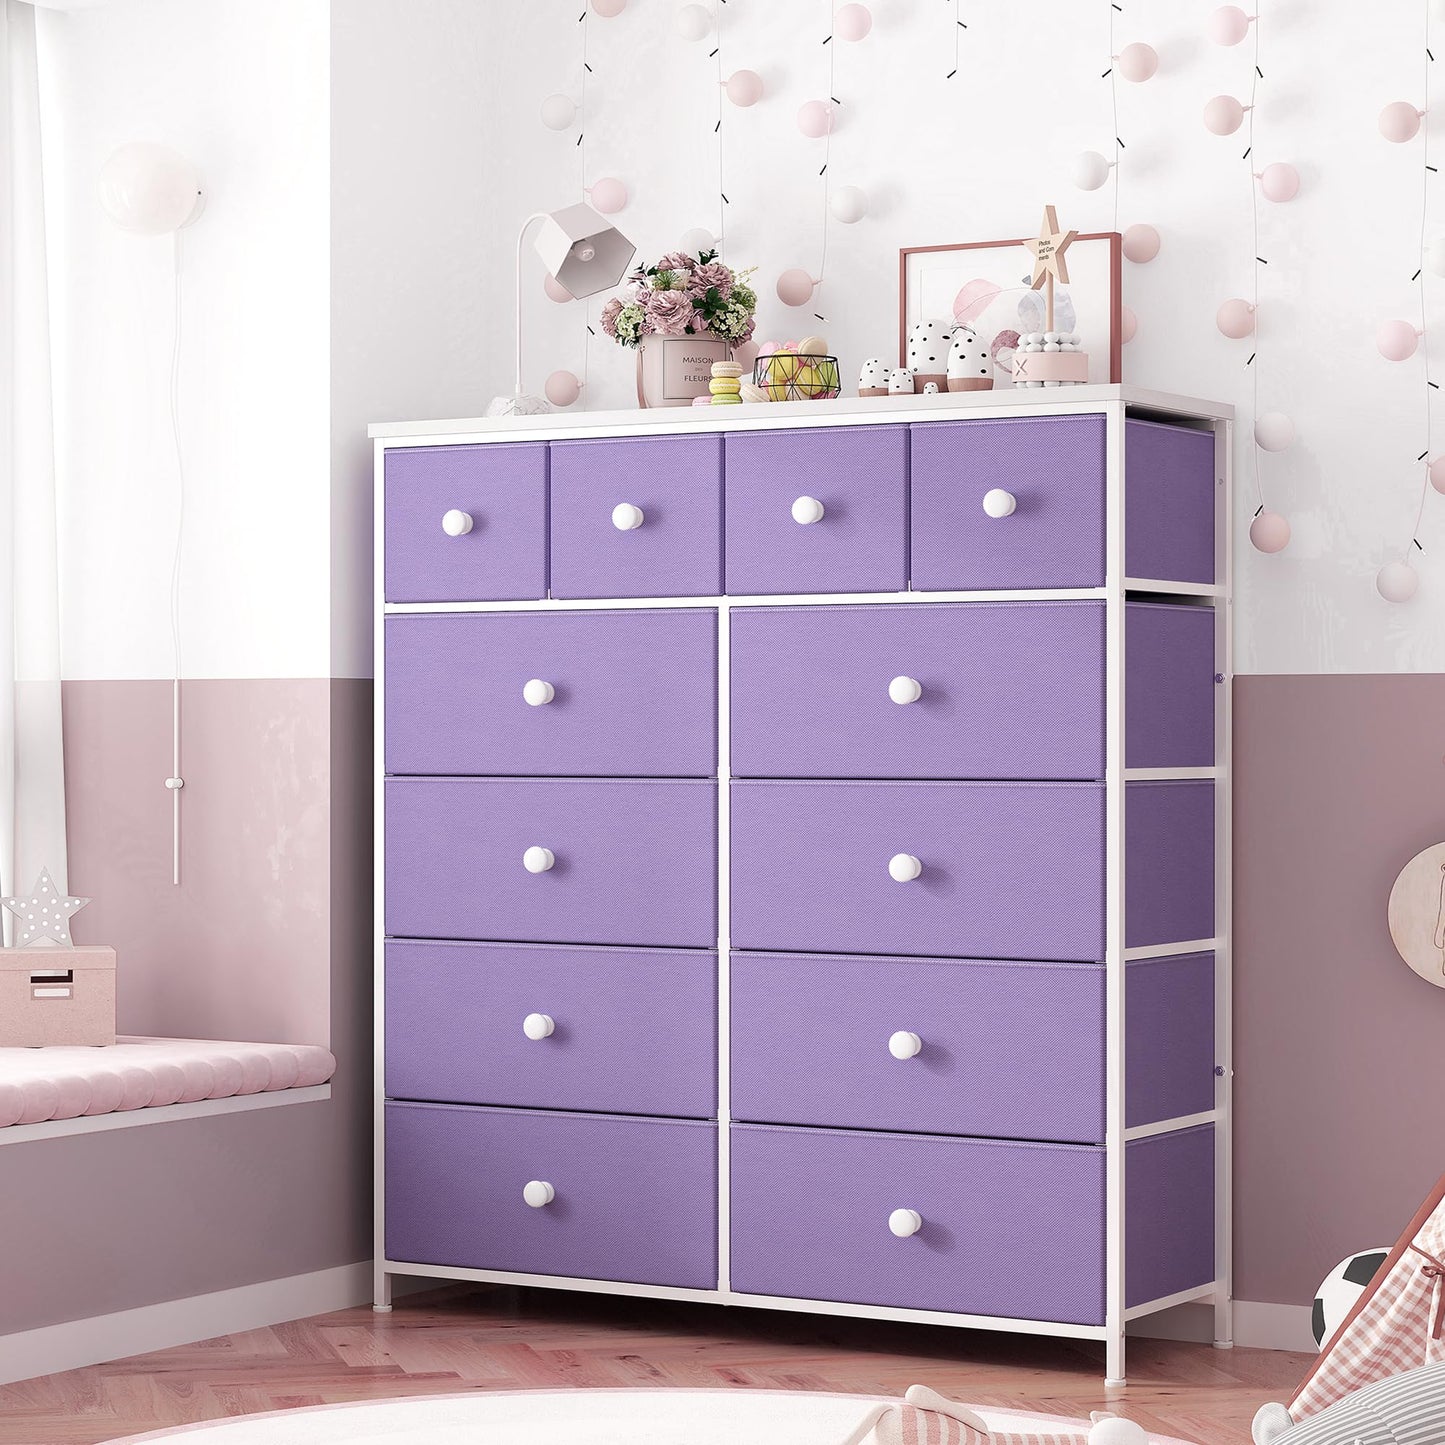 Hana Exports Pink Dresser for Girls Bedroom with 12 Drawers, Dresser for Bedroom with Sturdy Metal Frame and Wooden Top, Bedroom Dressers & Chests of Drawers for Bedroom, Nursery, Closet, Pink